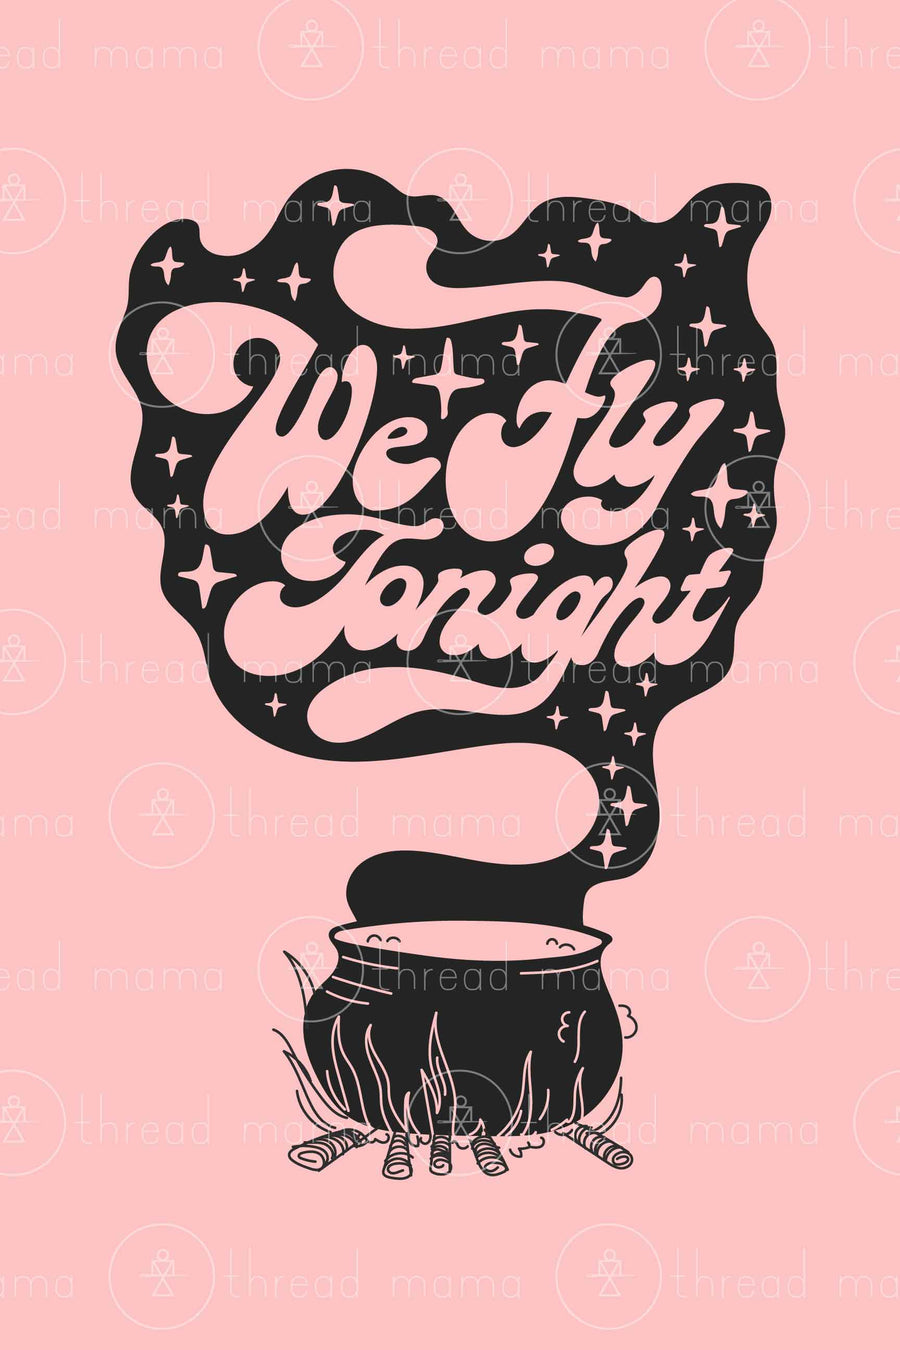 We Fly Tonight (Printable Poster)